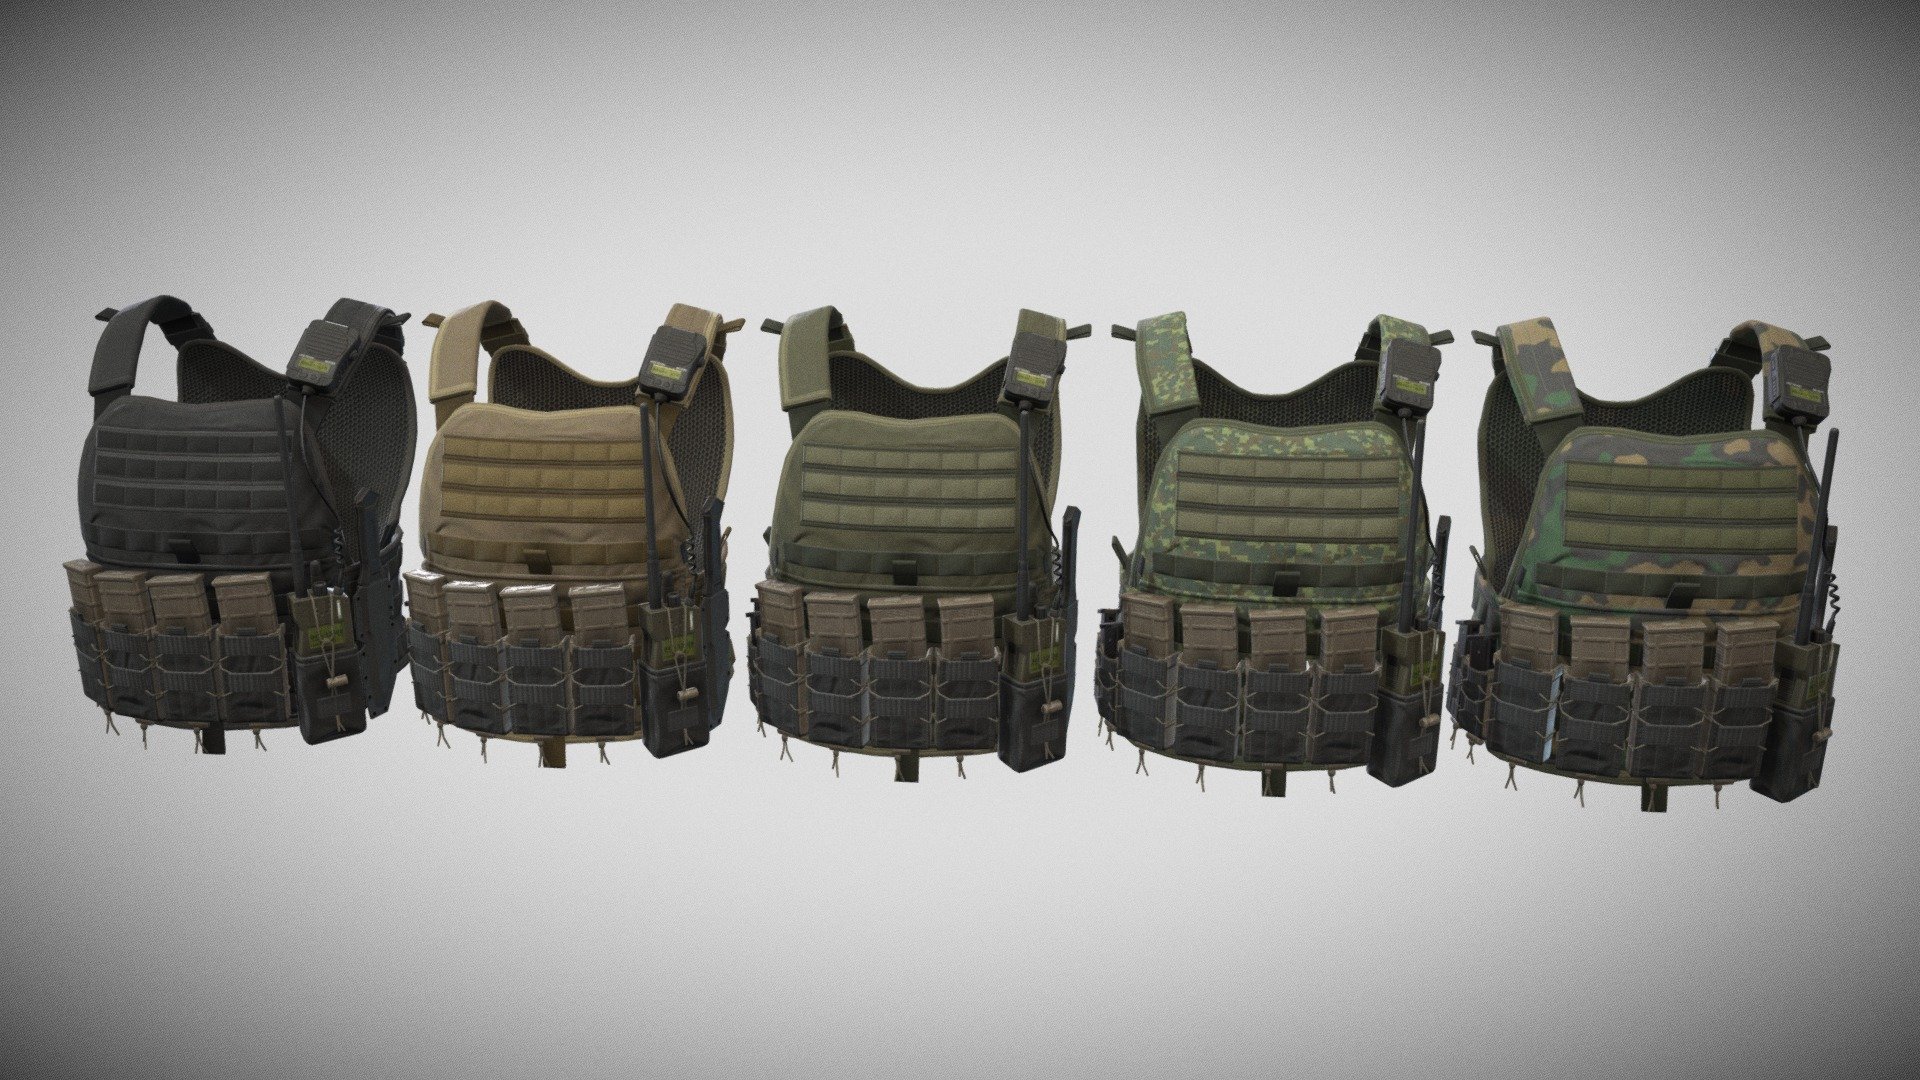 Game-Ready PBR low-poly model of tactical vest

Single model:

5364 polygons
10308 triangles
5627 vertices

Maps:

equipment_AO.tga, equipment_BaseColor.tga, equipment_Diffuse.tga, equipment_Metallic.tga, equipment_Normal.tga, equipment_Roughness.tga (1024x1024)

vest_Normal.tga, vest_Metallic.tga, vest_AO.tga, vest_Diffuse_Desert.tga, vest_Diffuse_Black.tga, vest_Diffuse_Camo_01.tga, vest_Diffuse_Camo.tga, vest_Roughness.tga, vest_Diffuse_Green.tga (1024x1024) - Tactical Vest - 3D model by alpenwolf (@alpen) 3d model